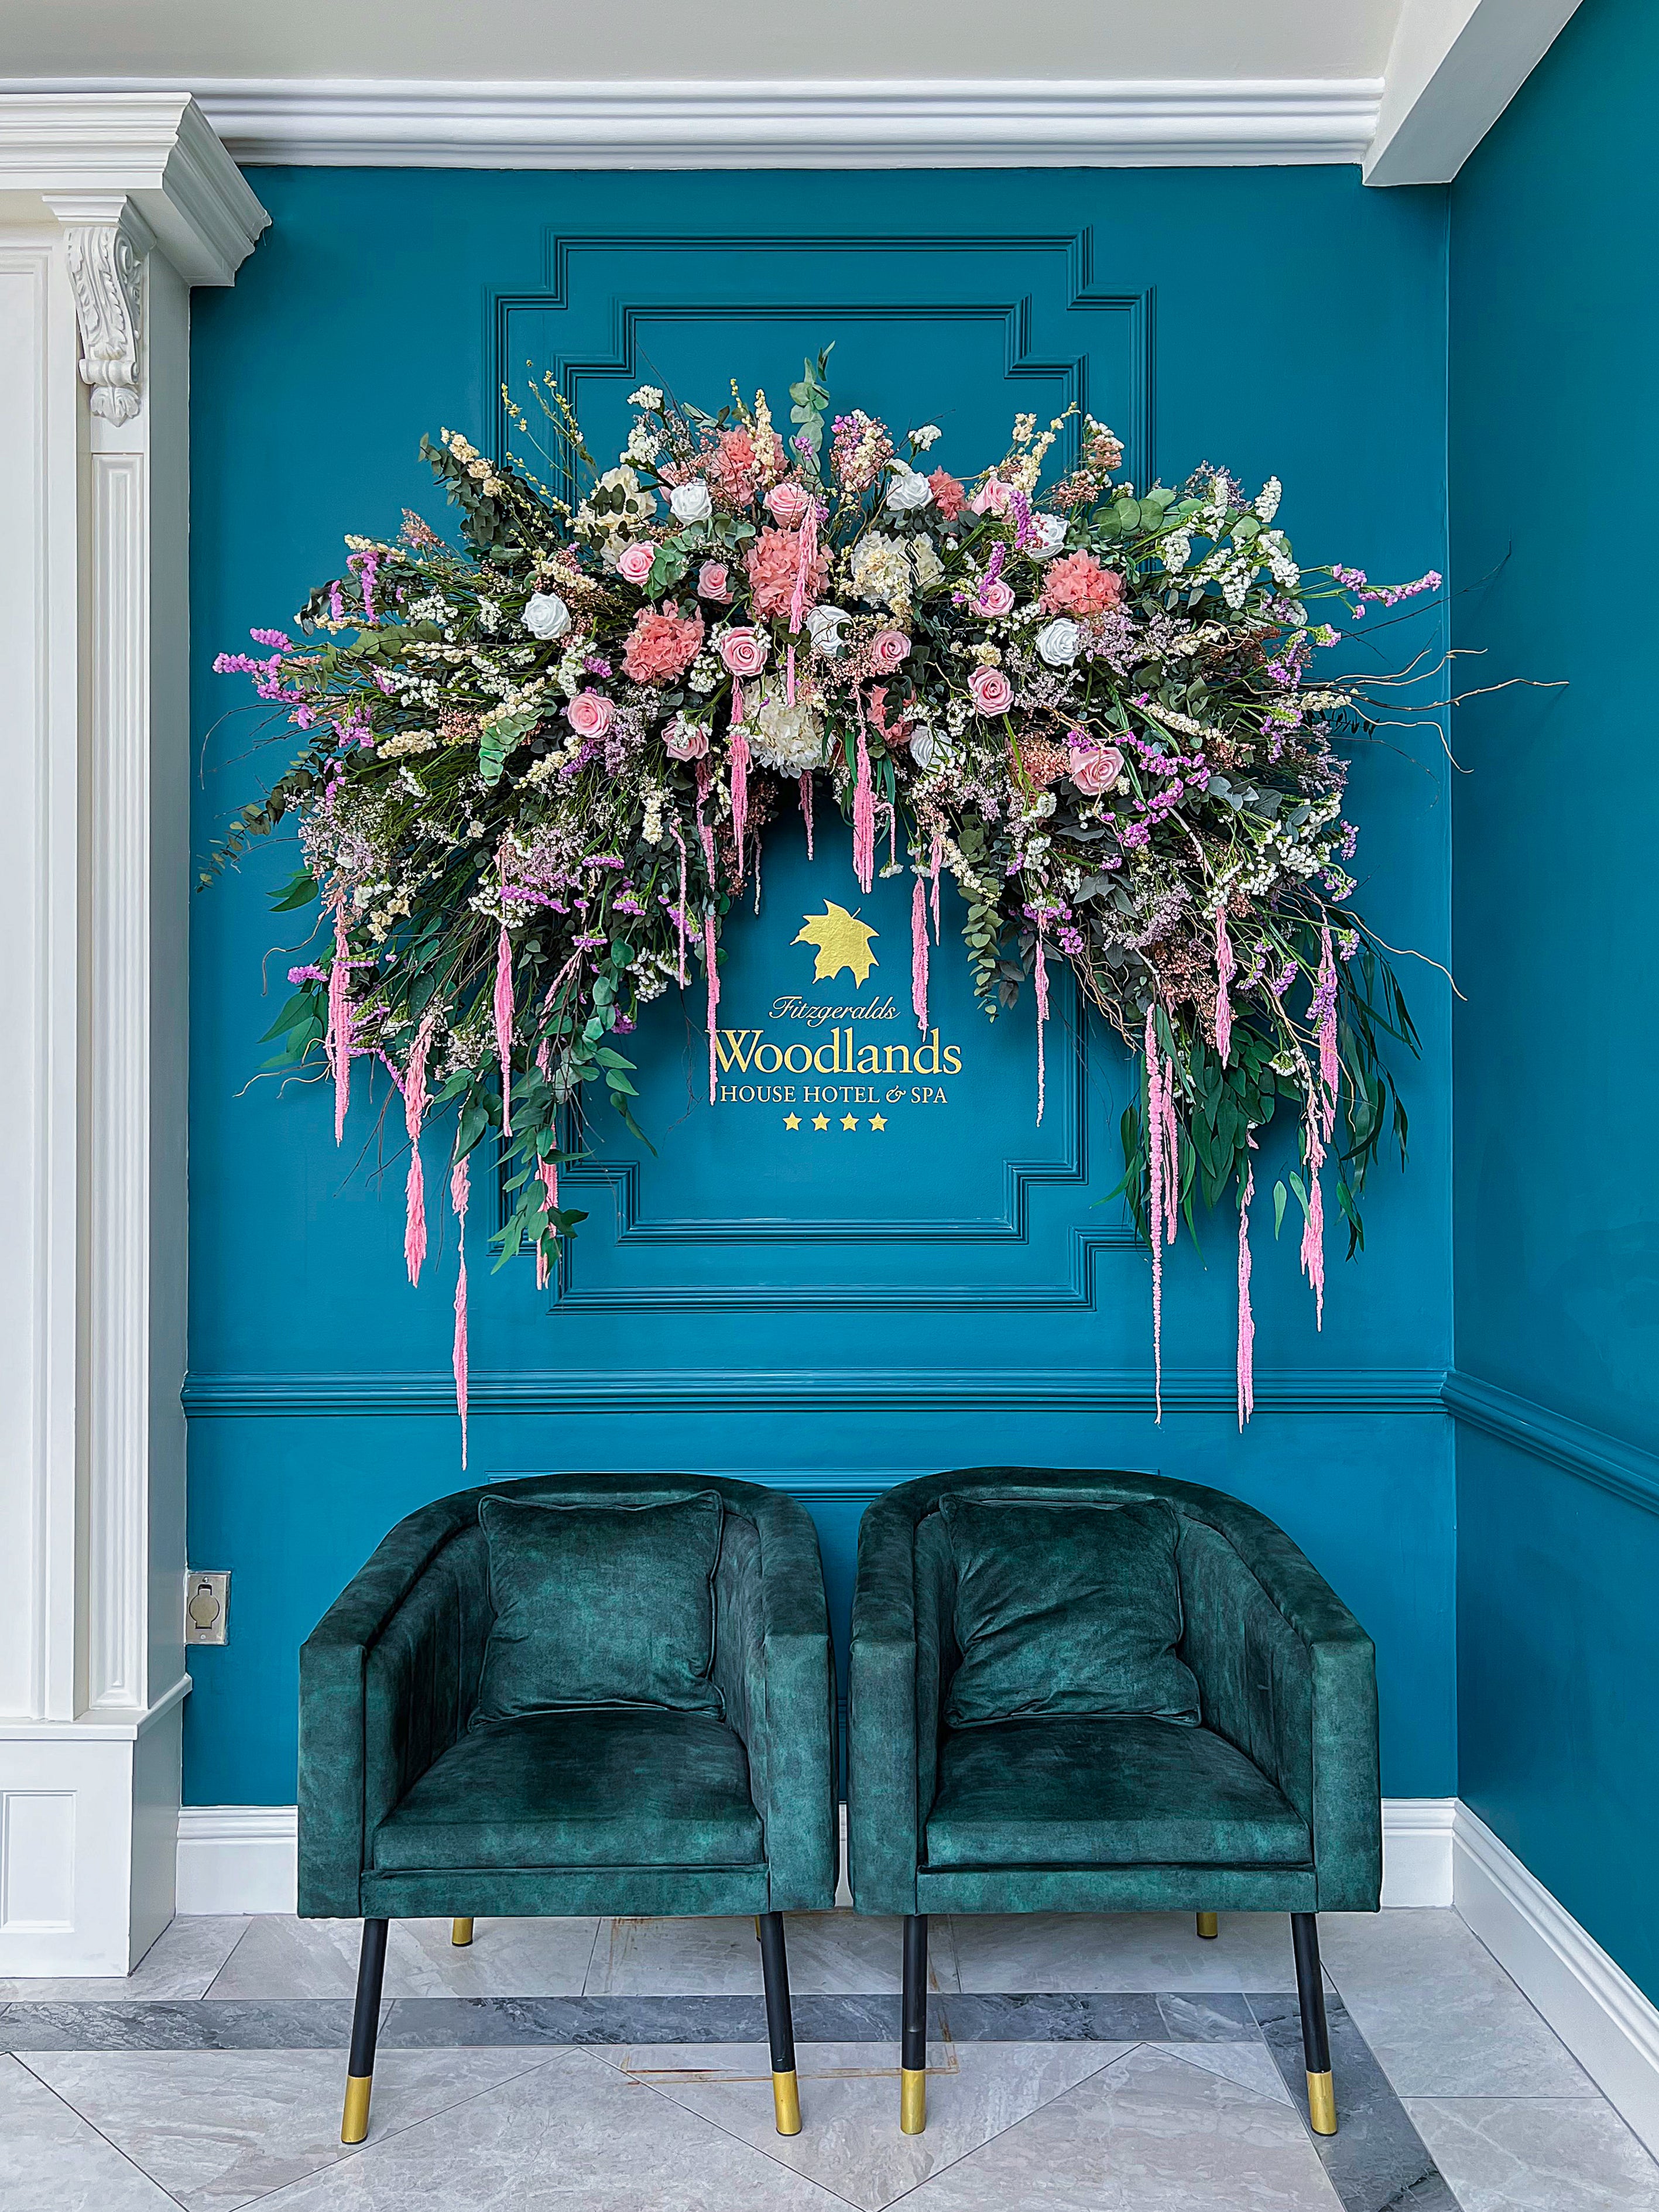 A beautiful hotel transformation like none other by event florist Amaranté London at Fitzgerald Woodlands Ireland hotel.